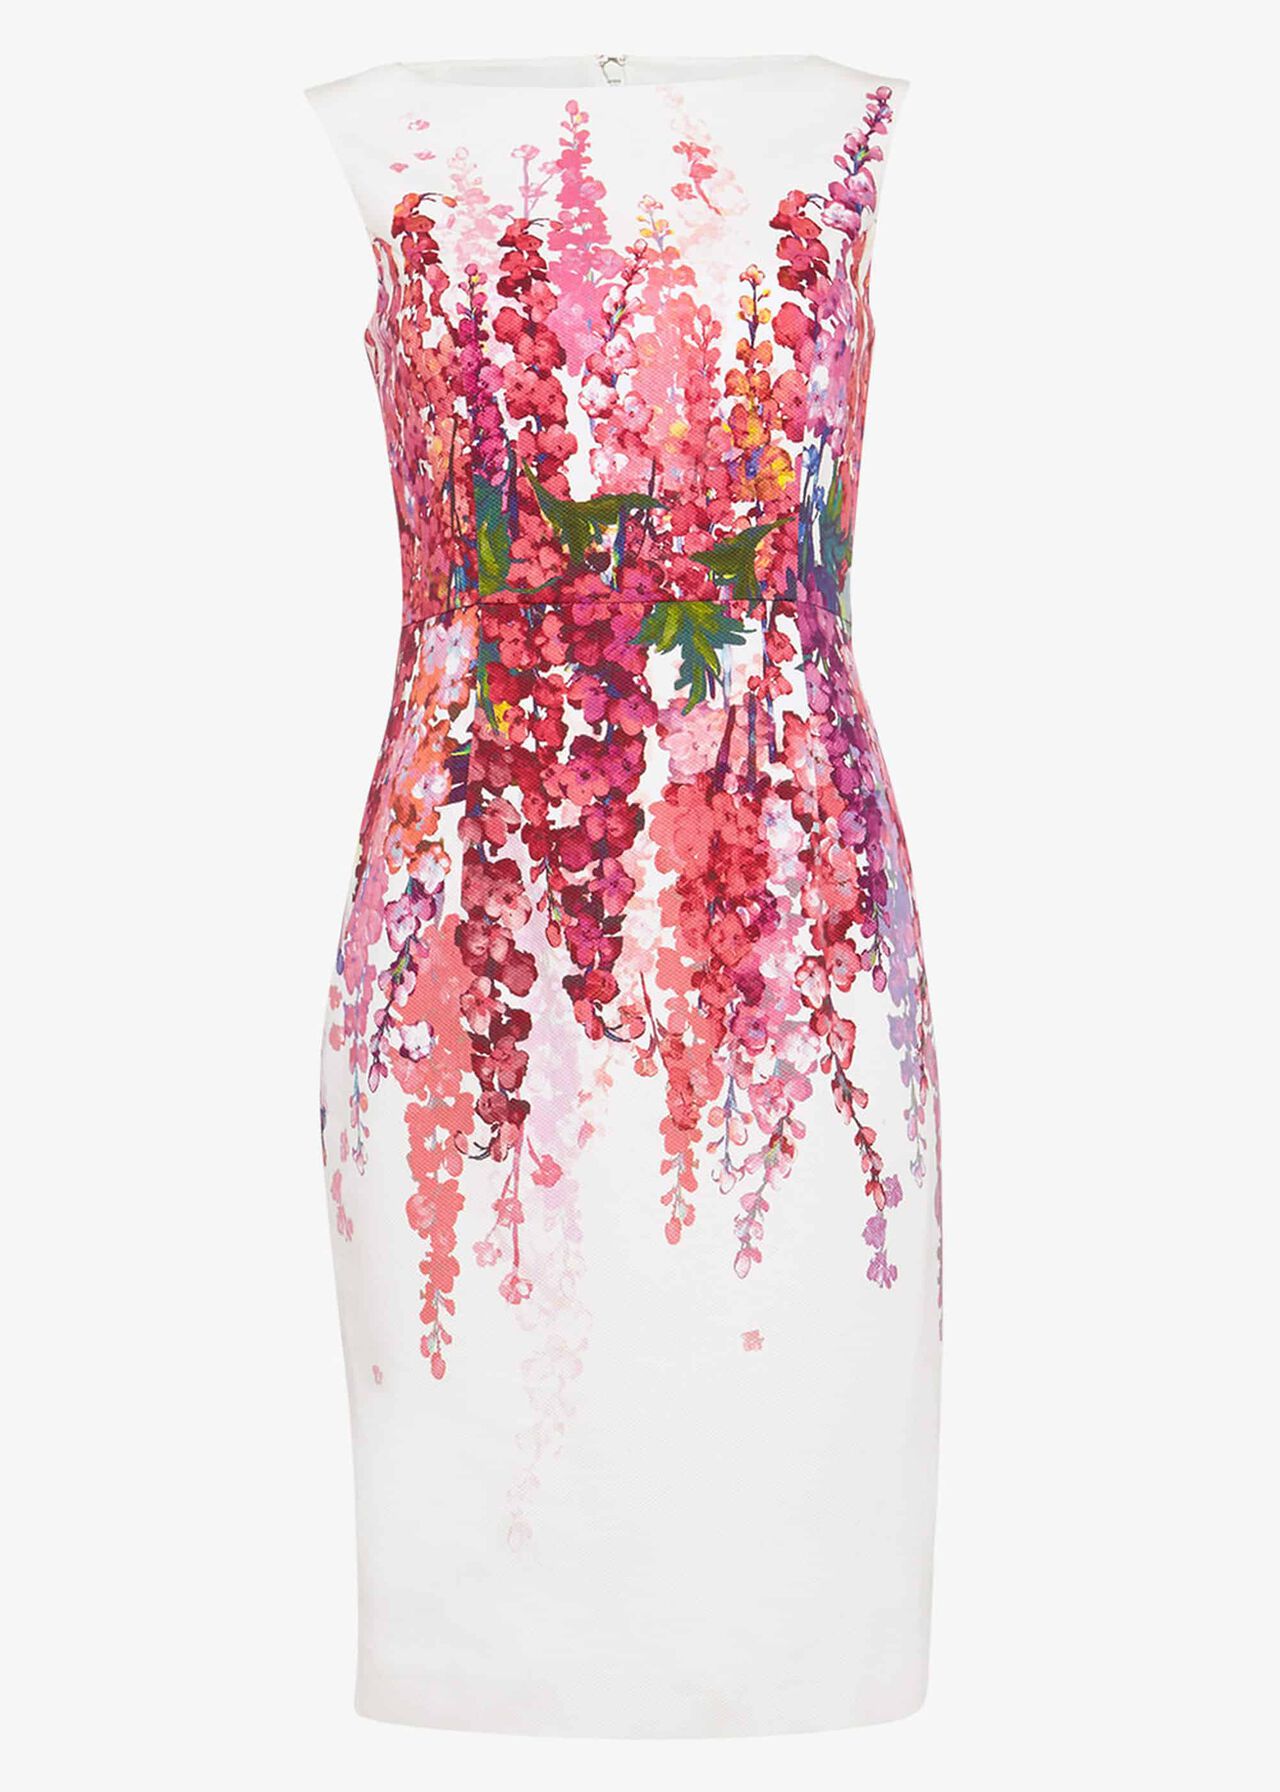 Jessica Printed Floral Dress | Phase Eight